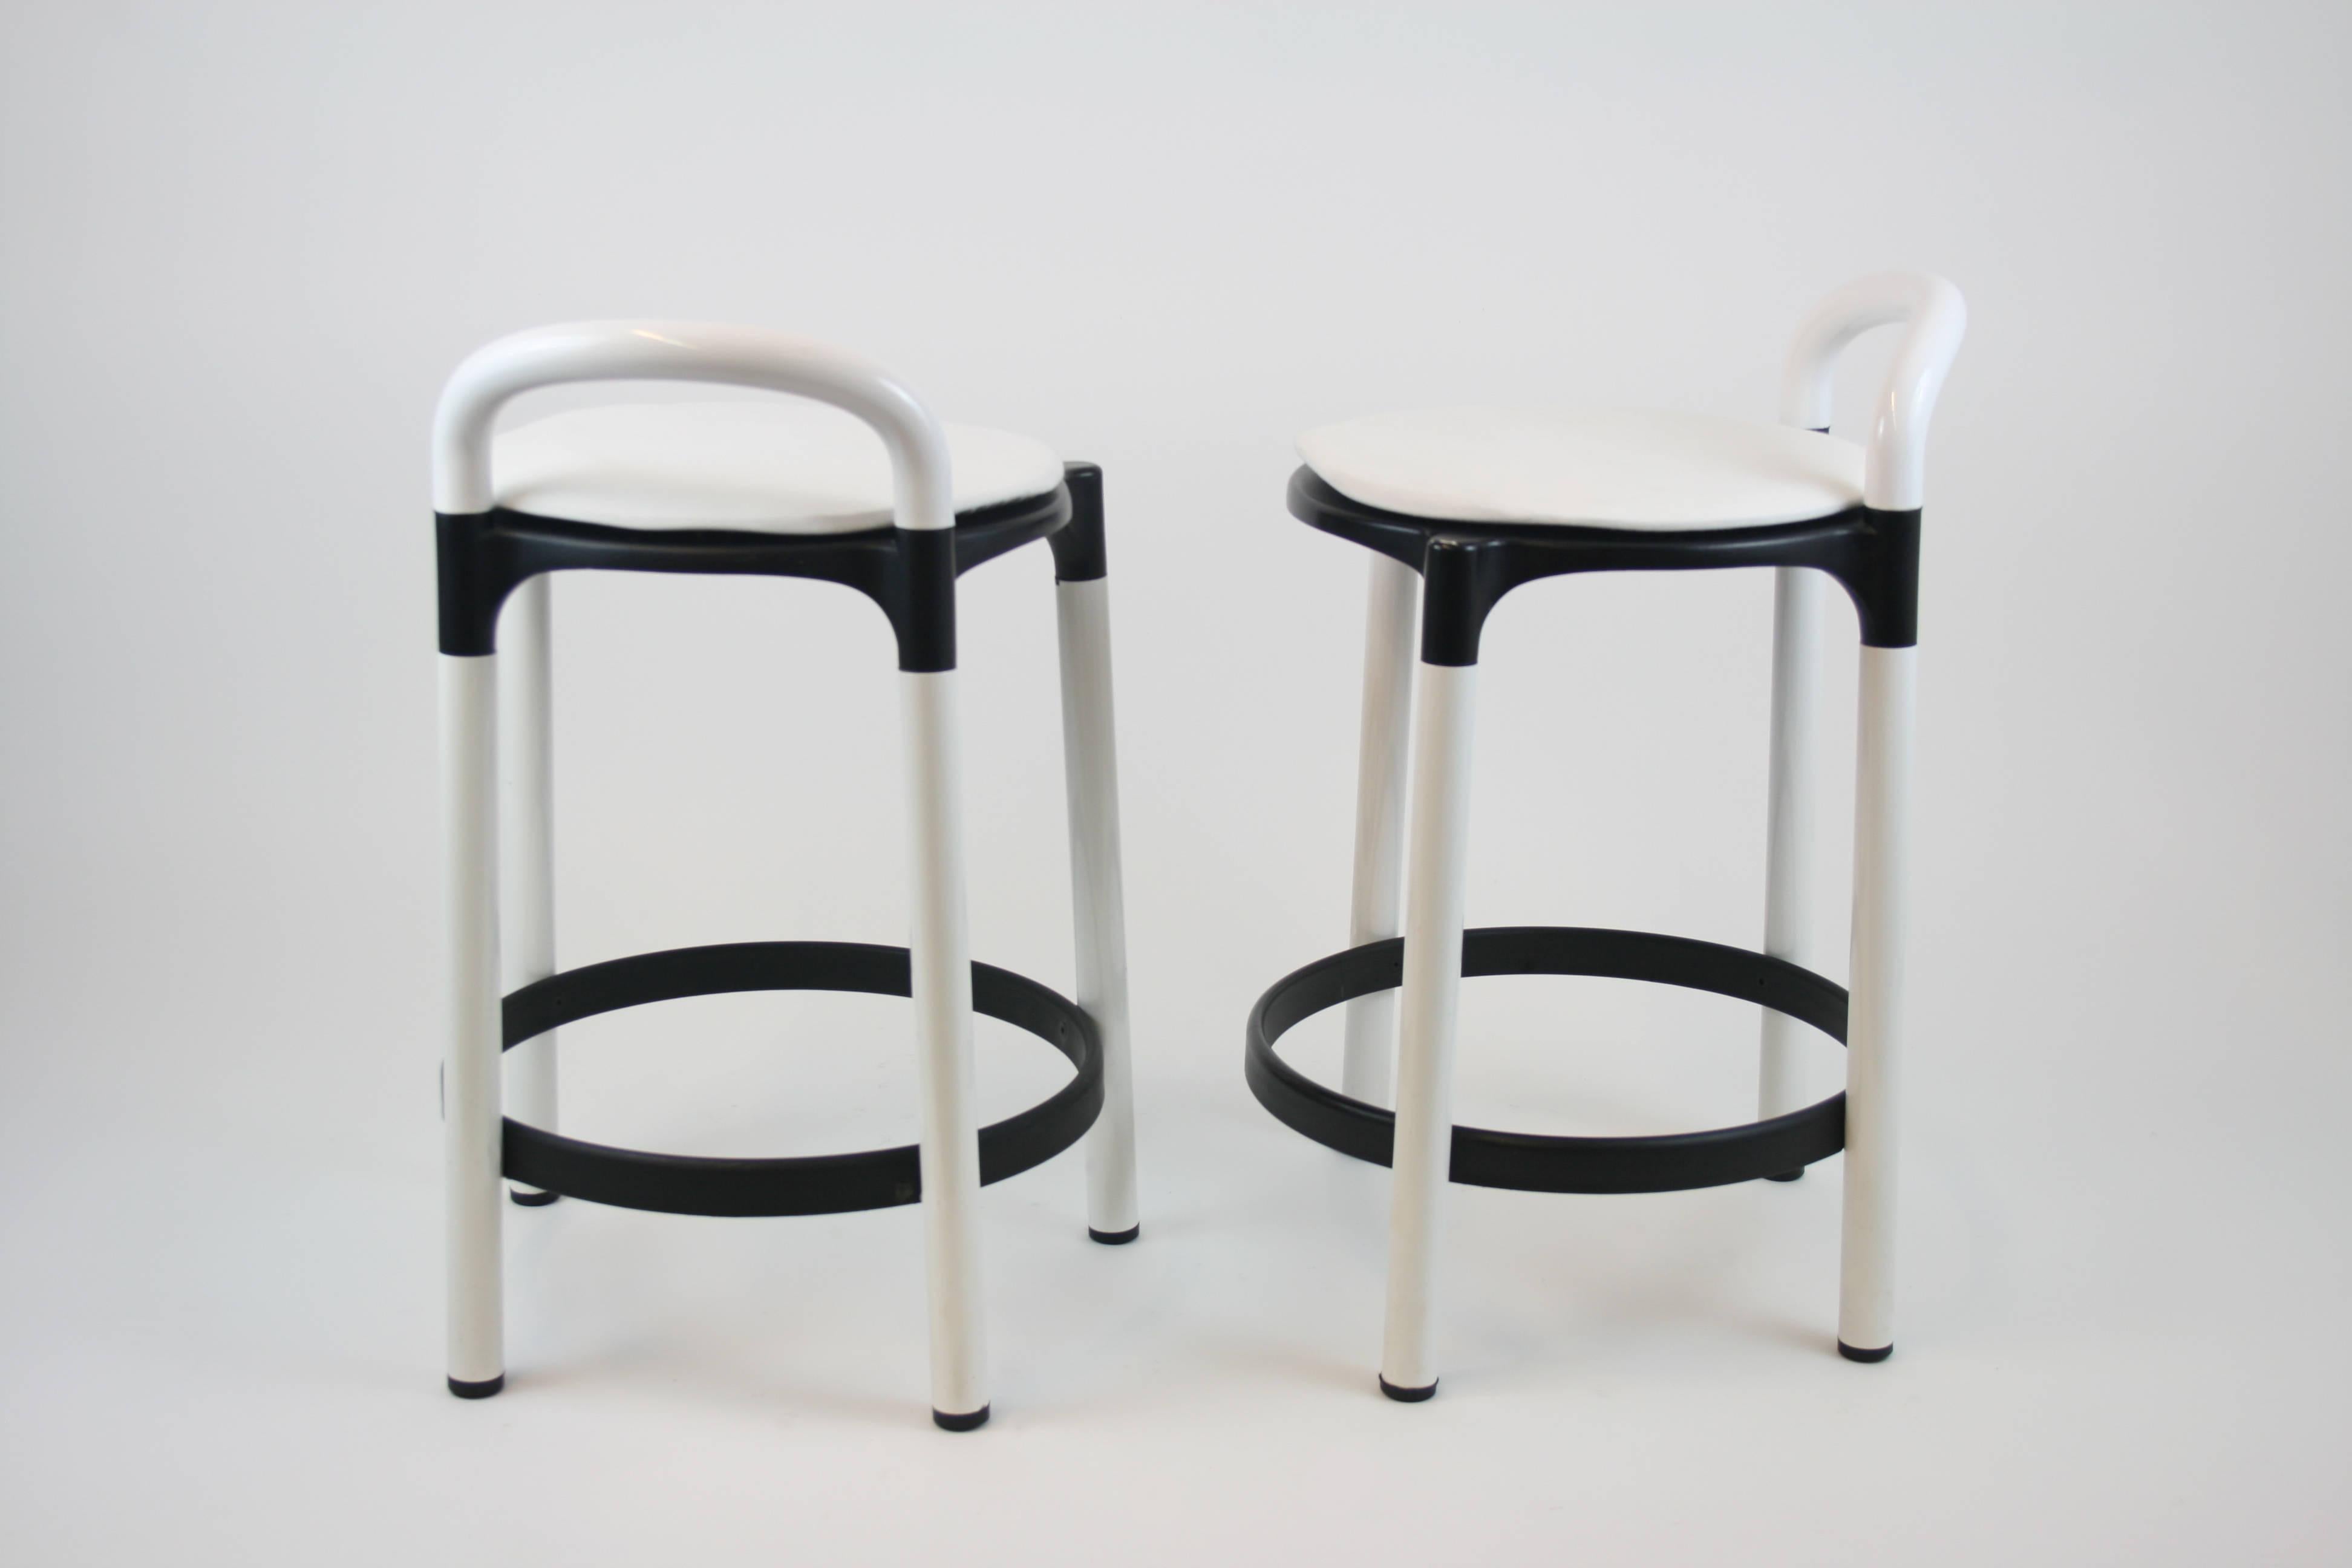 Two typical examples of Italian design created and manufactured in the late 1970s. As an inherent philosophy of Kartell each piece of furniture is without any screw or fixings. Although beyond 40 now they still retained their fresh and youthful